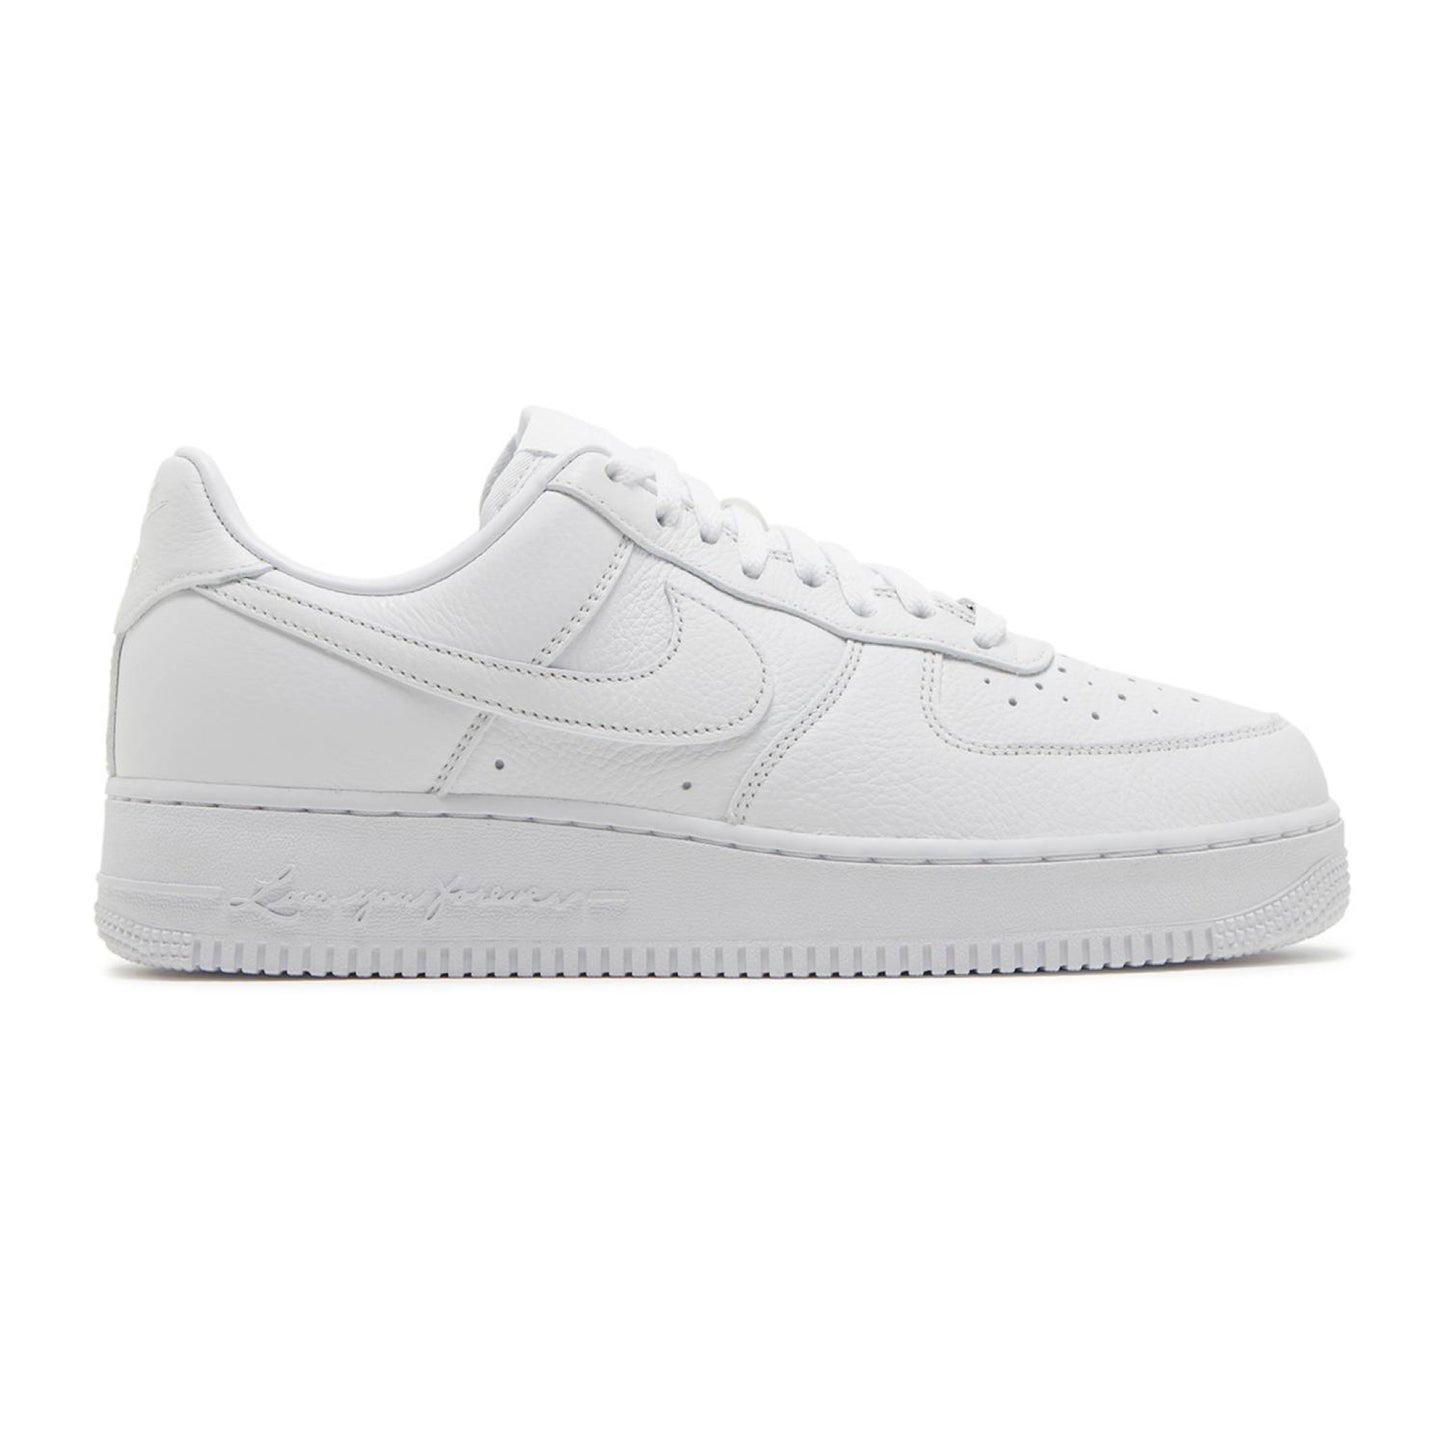 Nocta x Nike Air Force 1 “Certified Lover Boy”